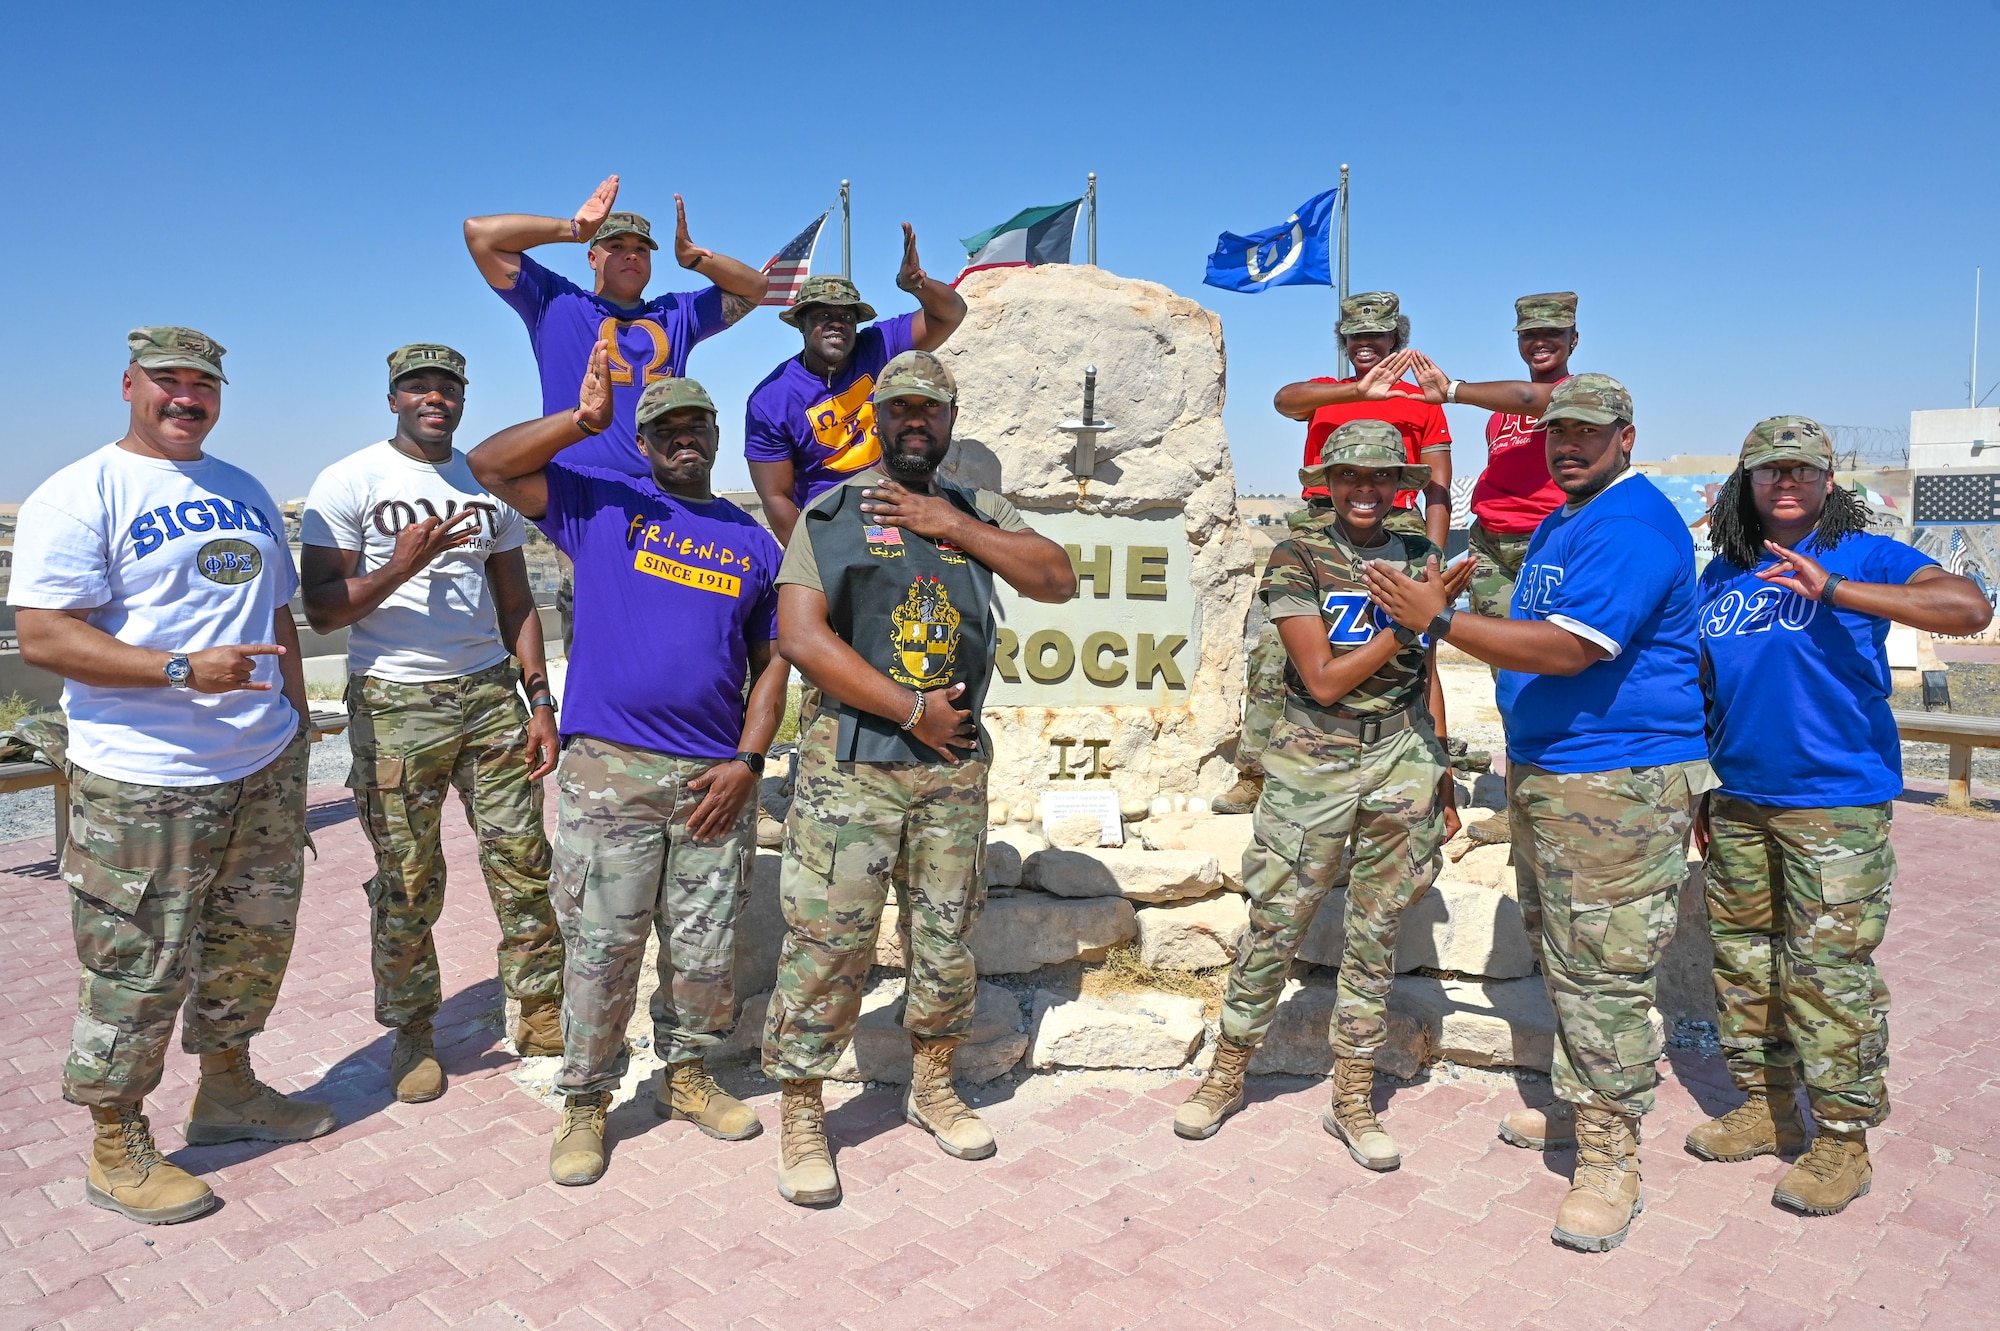 Several U.S. military members at AASAB have bonded through their shared connection to the Divine Nine, a group of nine historically Black sororities and fraternities. The values of these organizations echo those found in the military and add an extra layer of support to diverse populations through the mentorship and community they provide to one another on base.